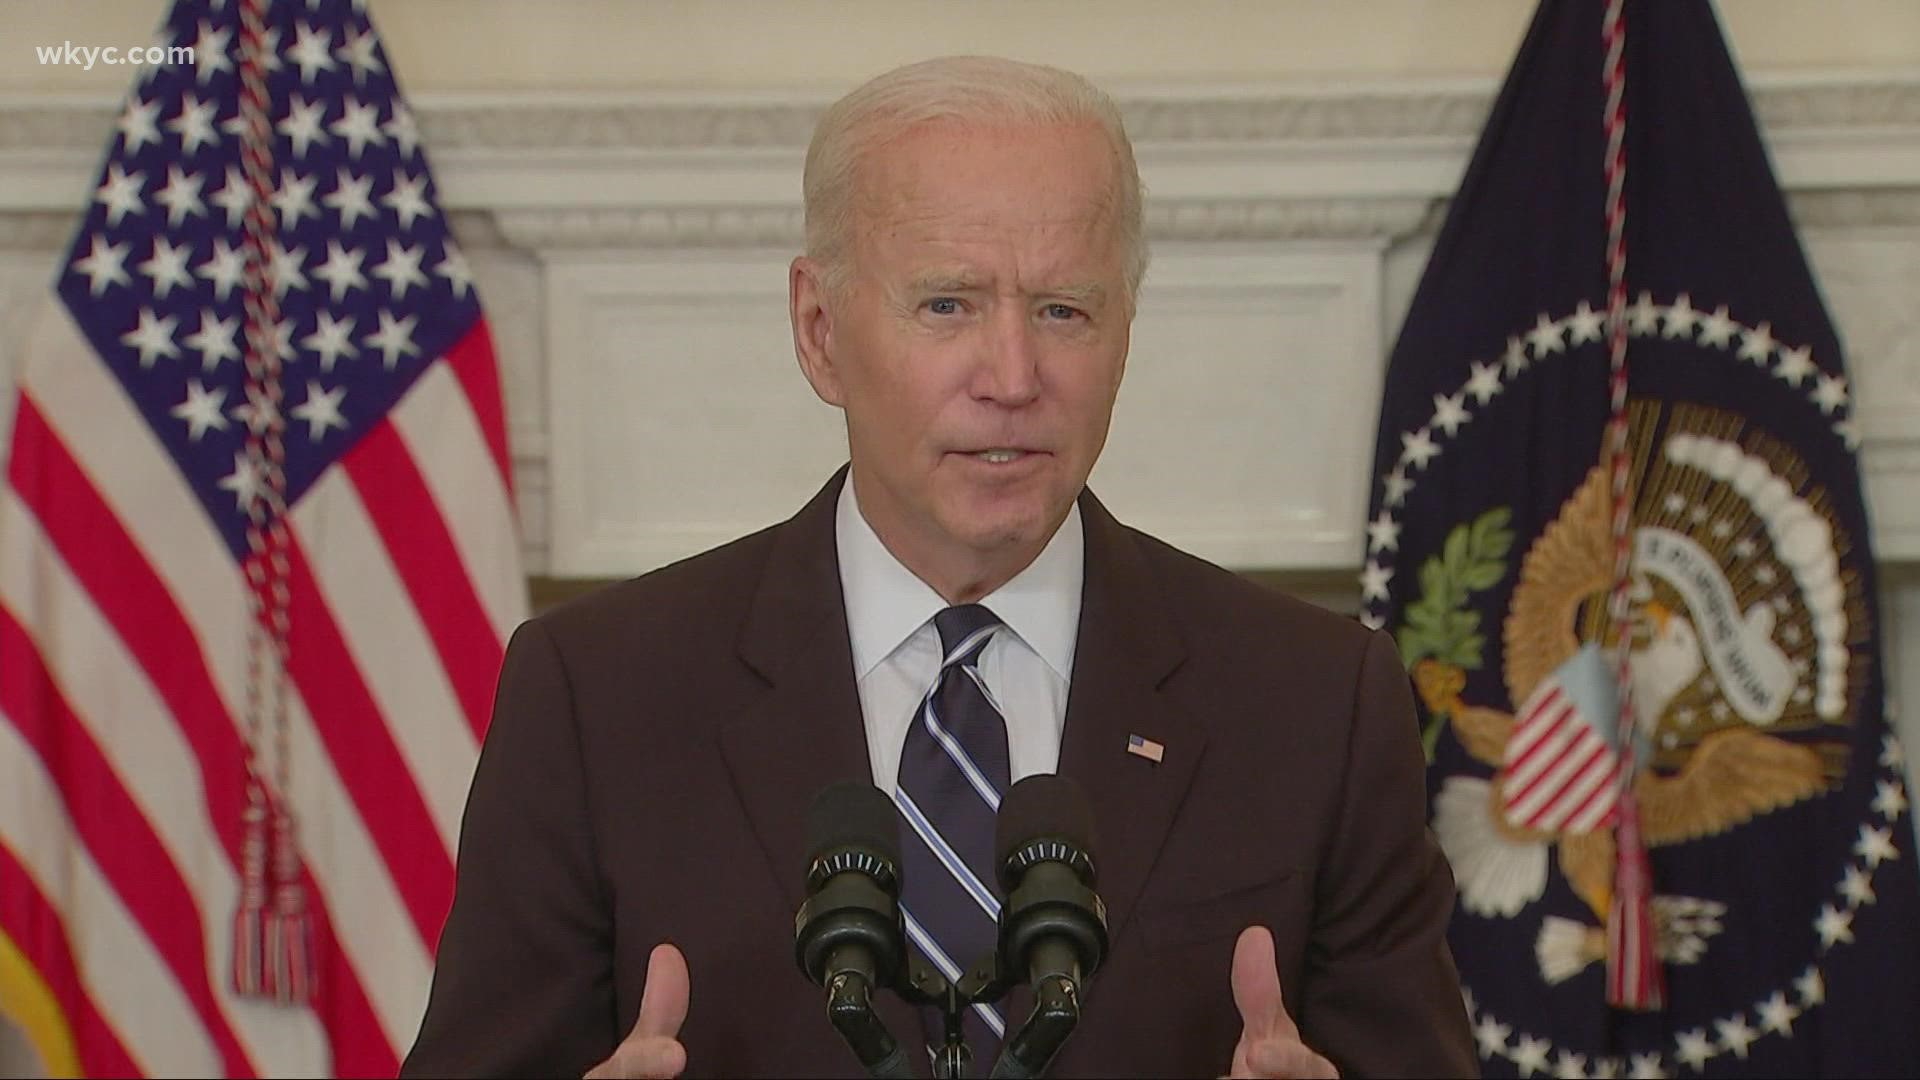 President Biden announced sweeping vaccine mandates for millions of Americans Thursday evening. Will Ujek has the story.